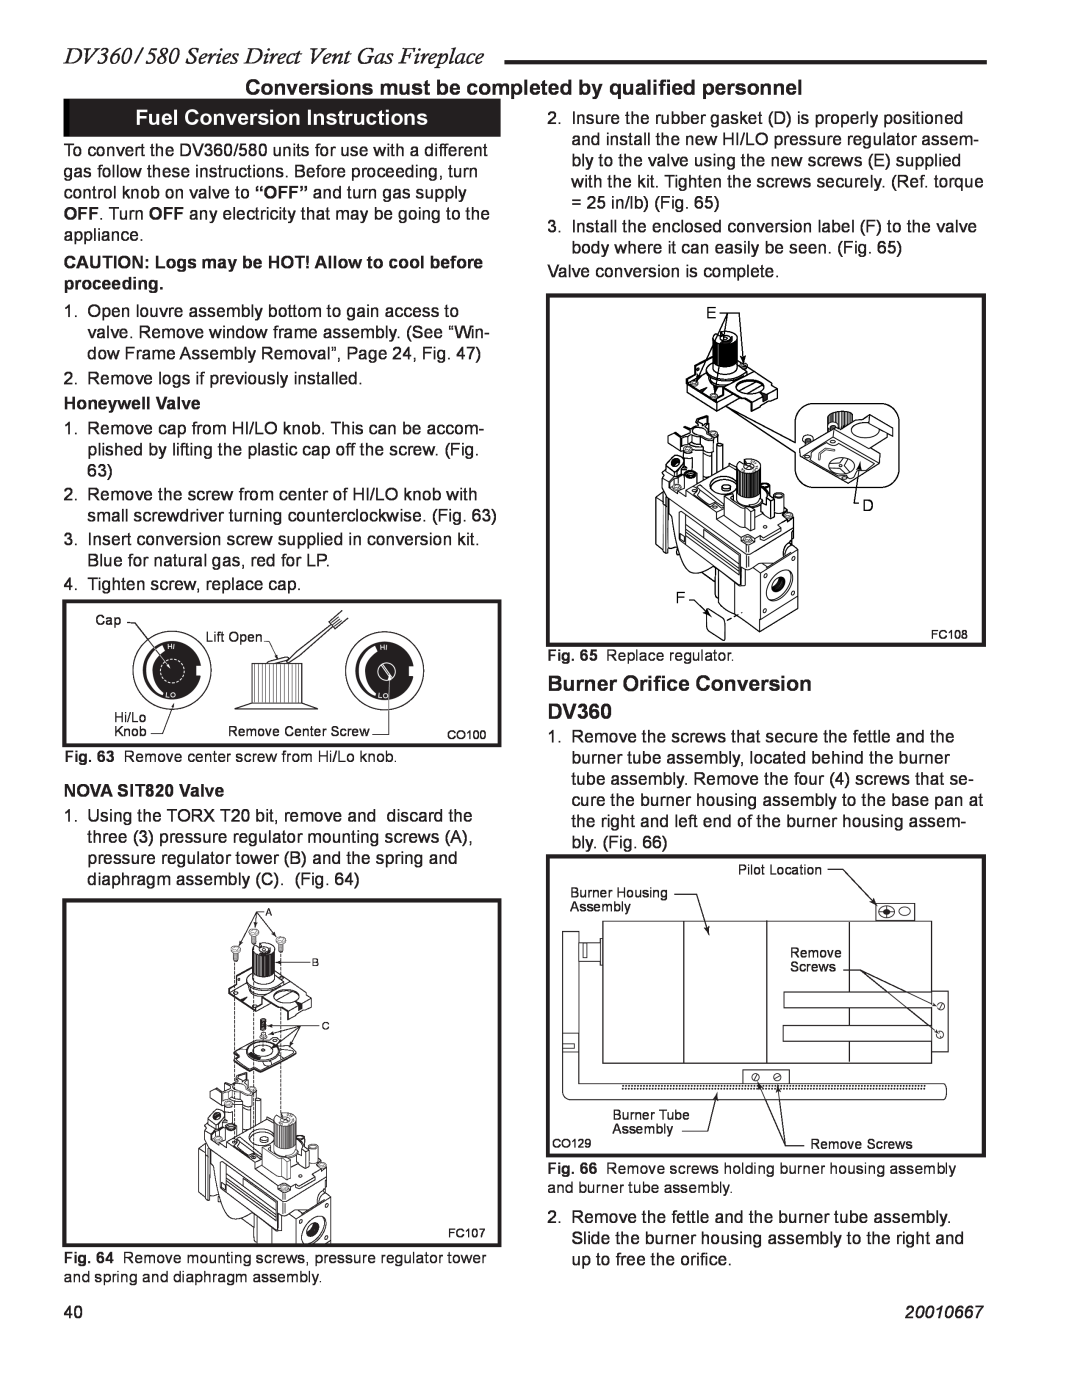 Vermont Casting Fuel Conversion Instructions, DV360/580 Series Direct Vent Gas Fireplace, Honeywell Valve, 20010667 